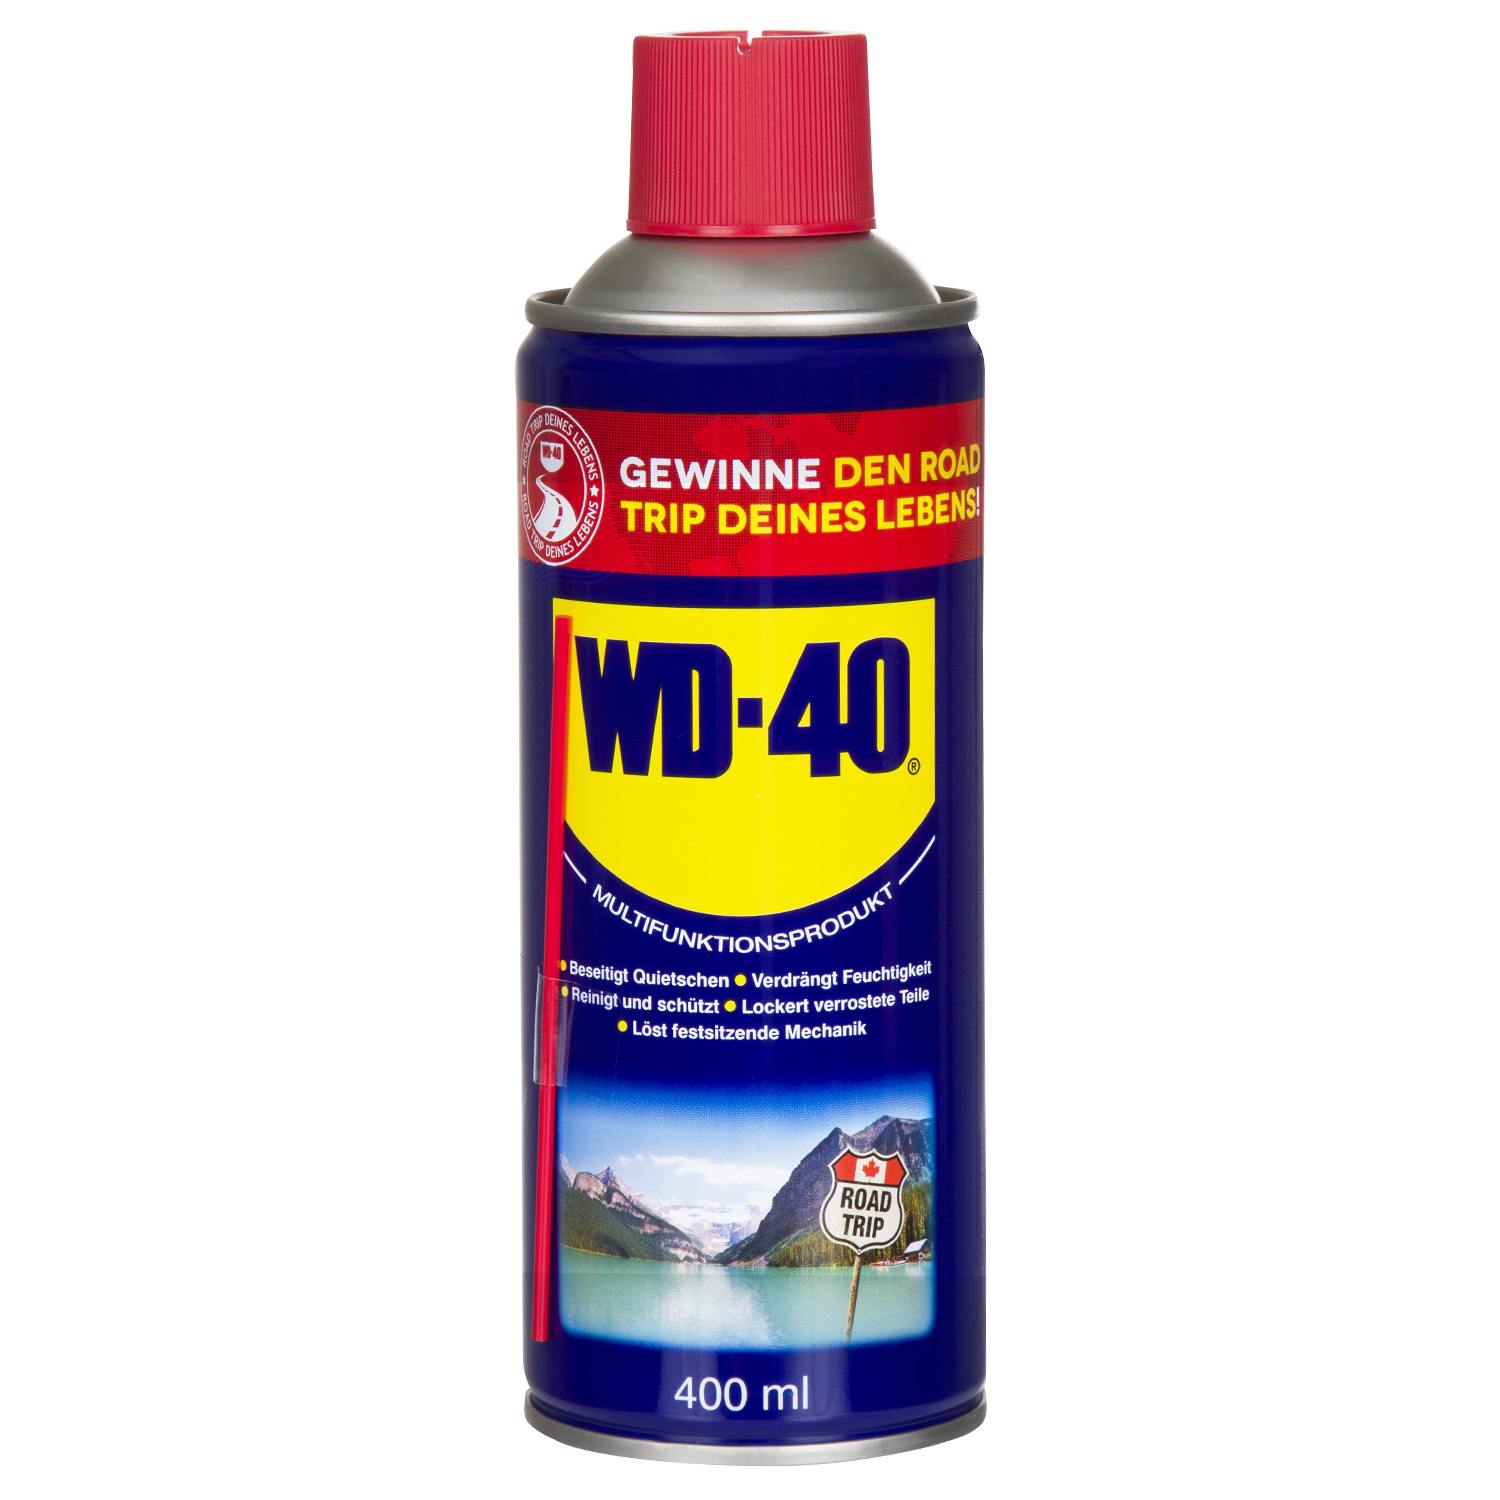 WD-40 Lubrifiant Multifonction Classic Spray Can, 400 ml